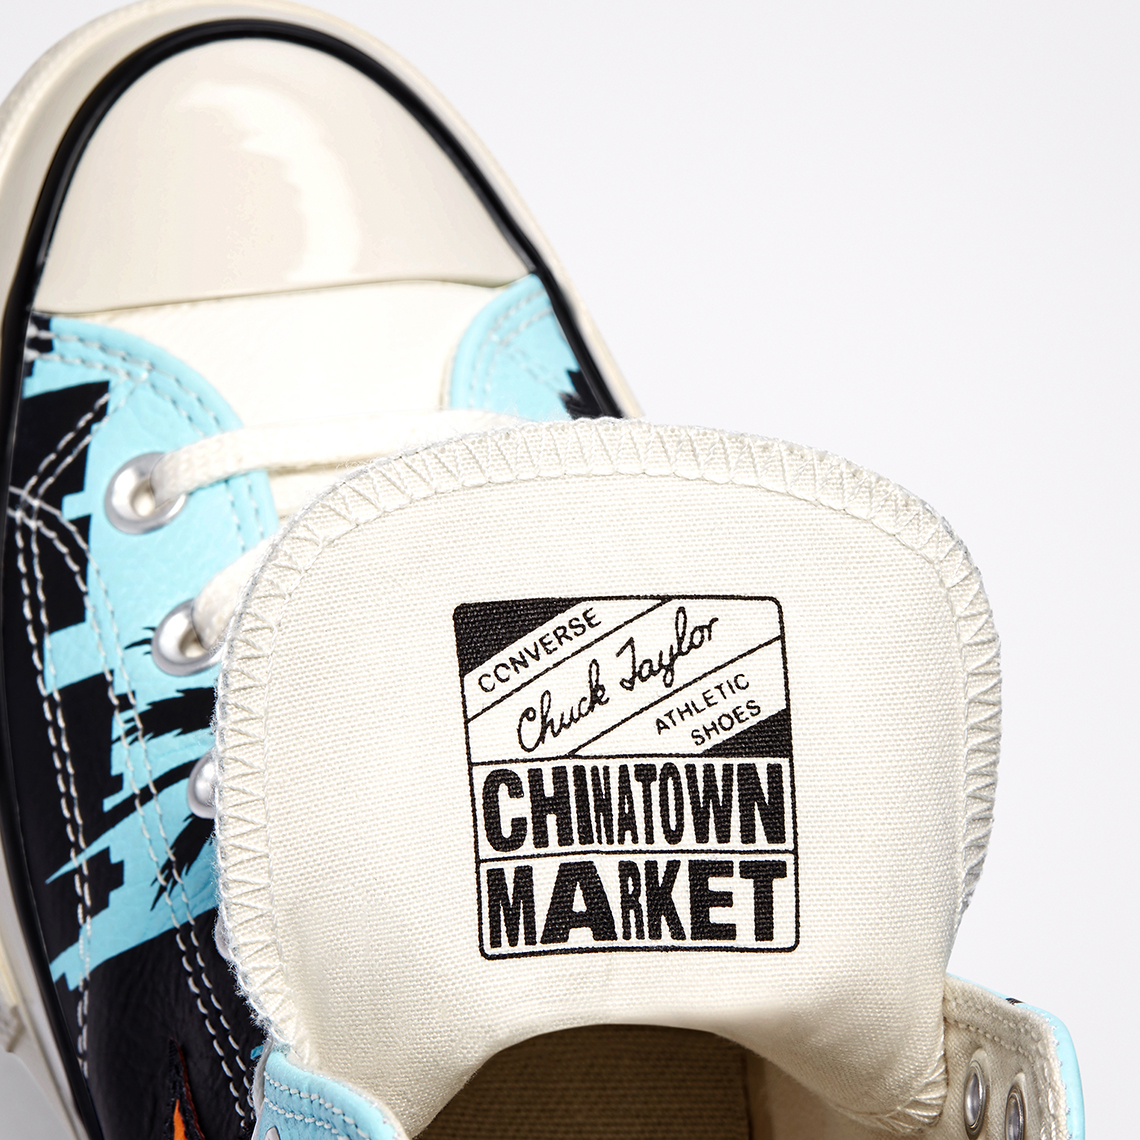 Chinatown Market The Converse Chuck Taylor 2 will be part of Converse latest collaboration Lakers 1